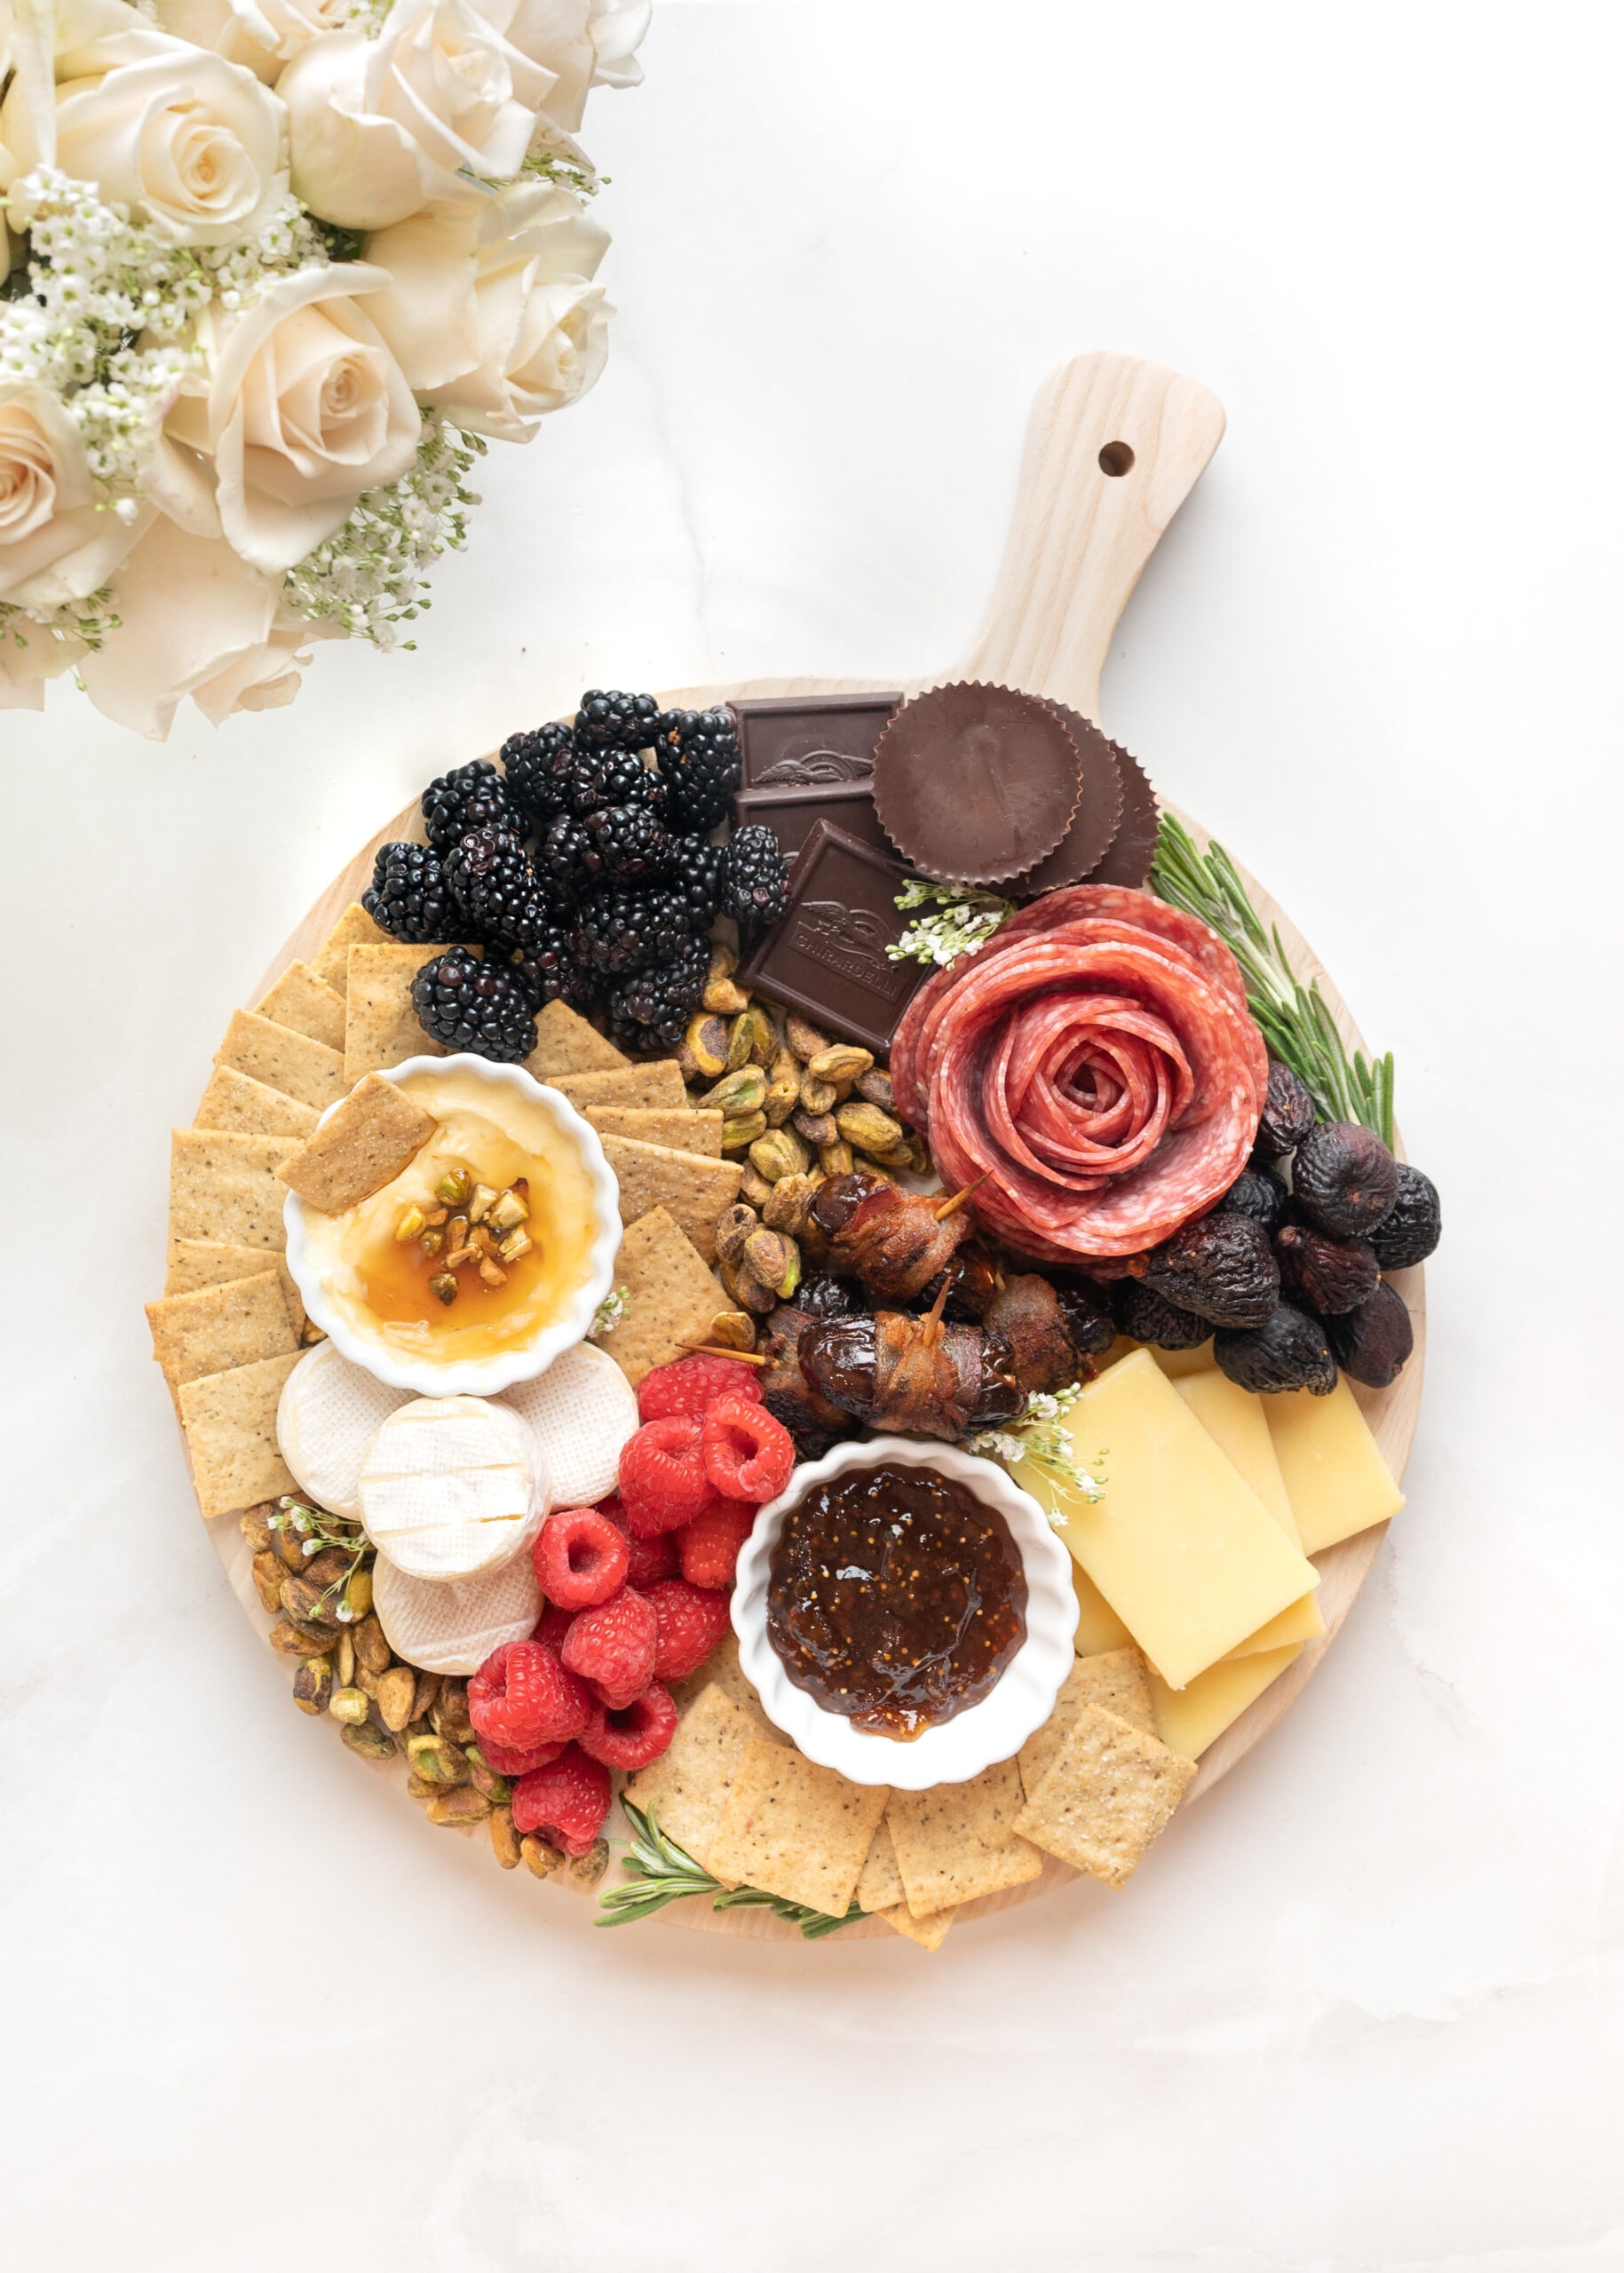 A Small charcuterie board with crackers, cheese, fruit, and chocolate. A vase with pink roses and babys breath are in the corner.